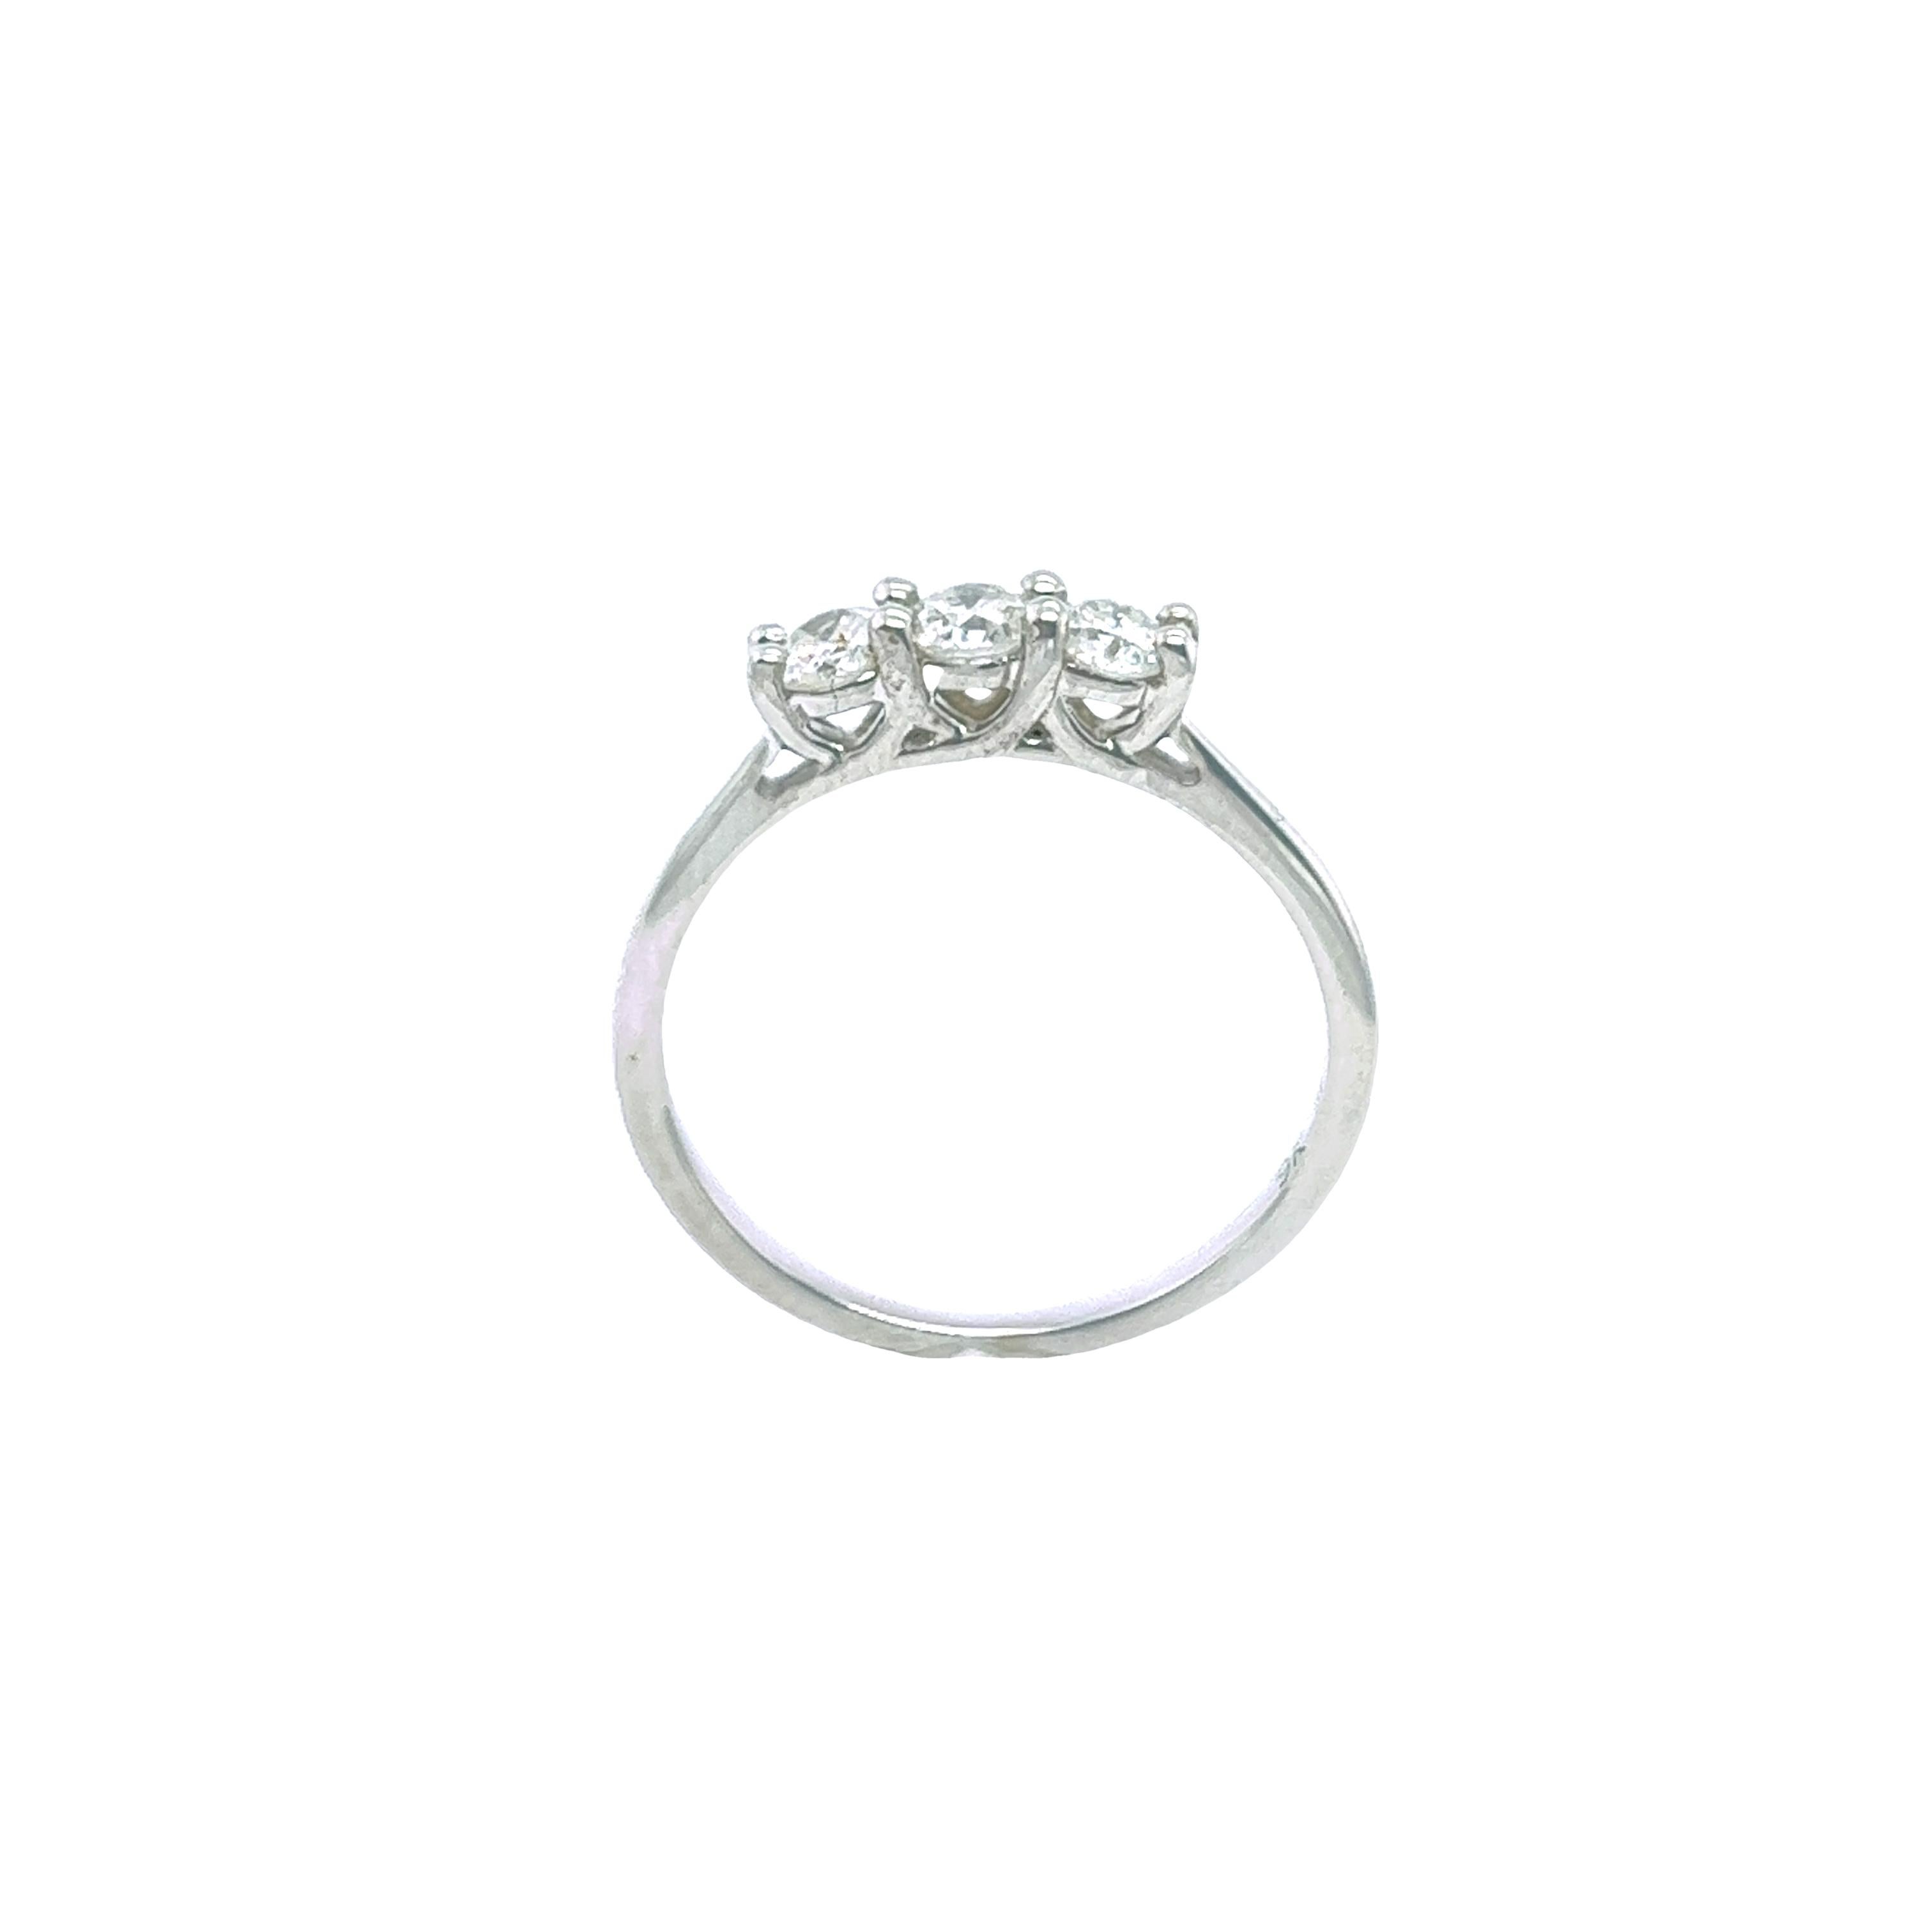 An elegant diamond ring for your engagement, set with 3 round brilliant cut natural diamonds, 0.50ct total diamond weight in a 9ct white gold setting.

Total Diamond Weight: 0.50ct
Diamond Colour: G-H
Diamond Clarity: I2-I3
Width of Band: